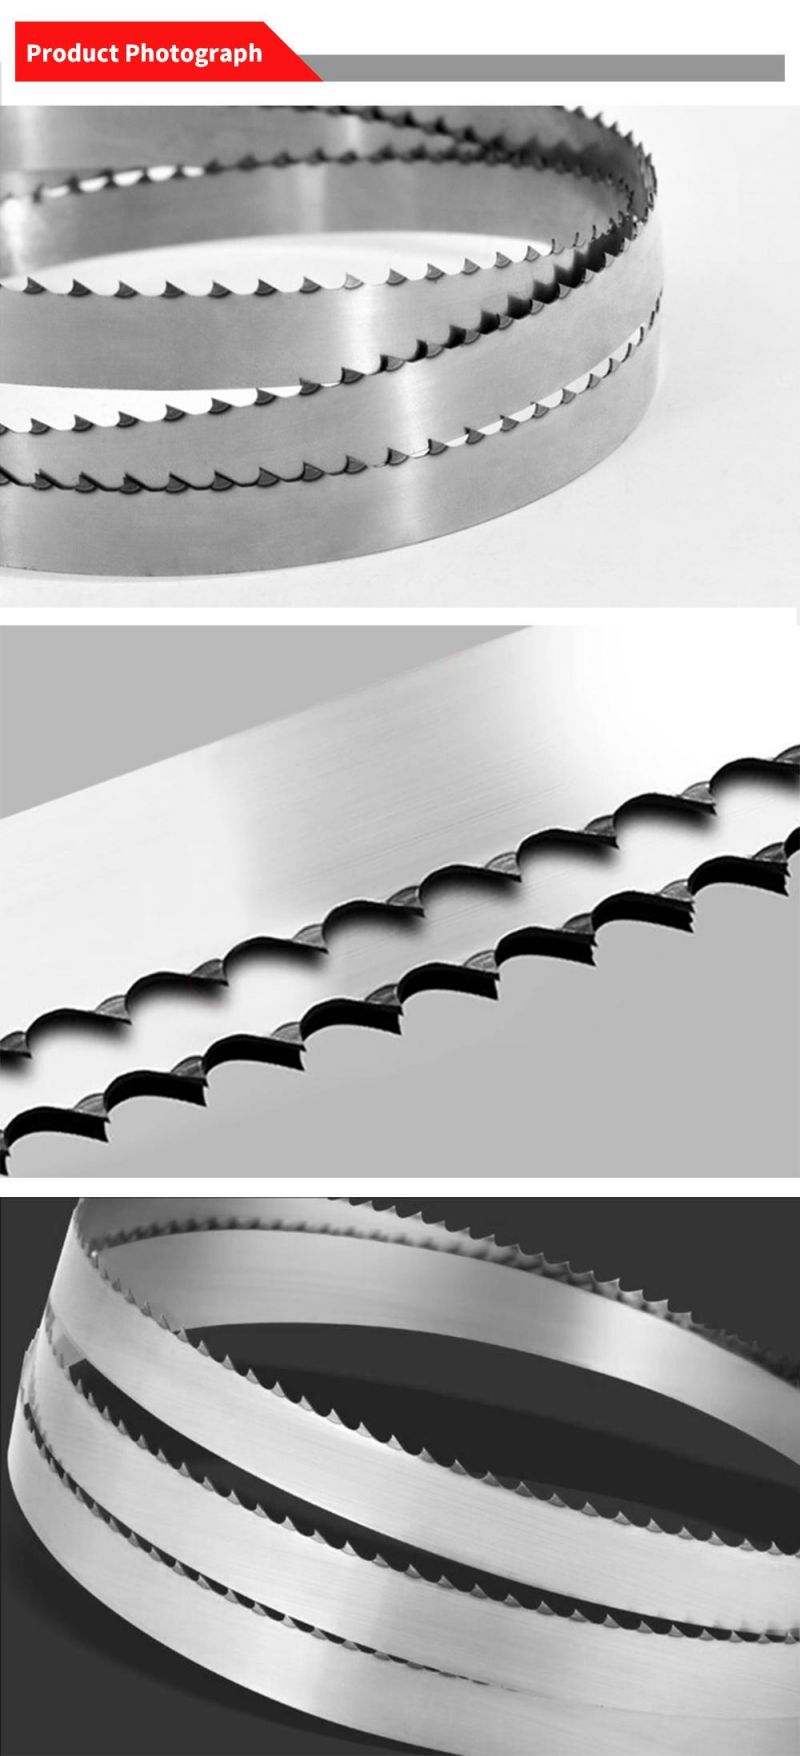 Pilihu Stainless Steel Band Saw Blade for Meat Beef Cutting